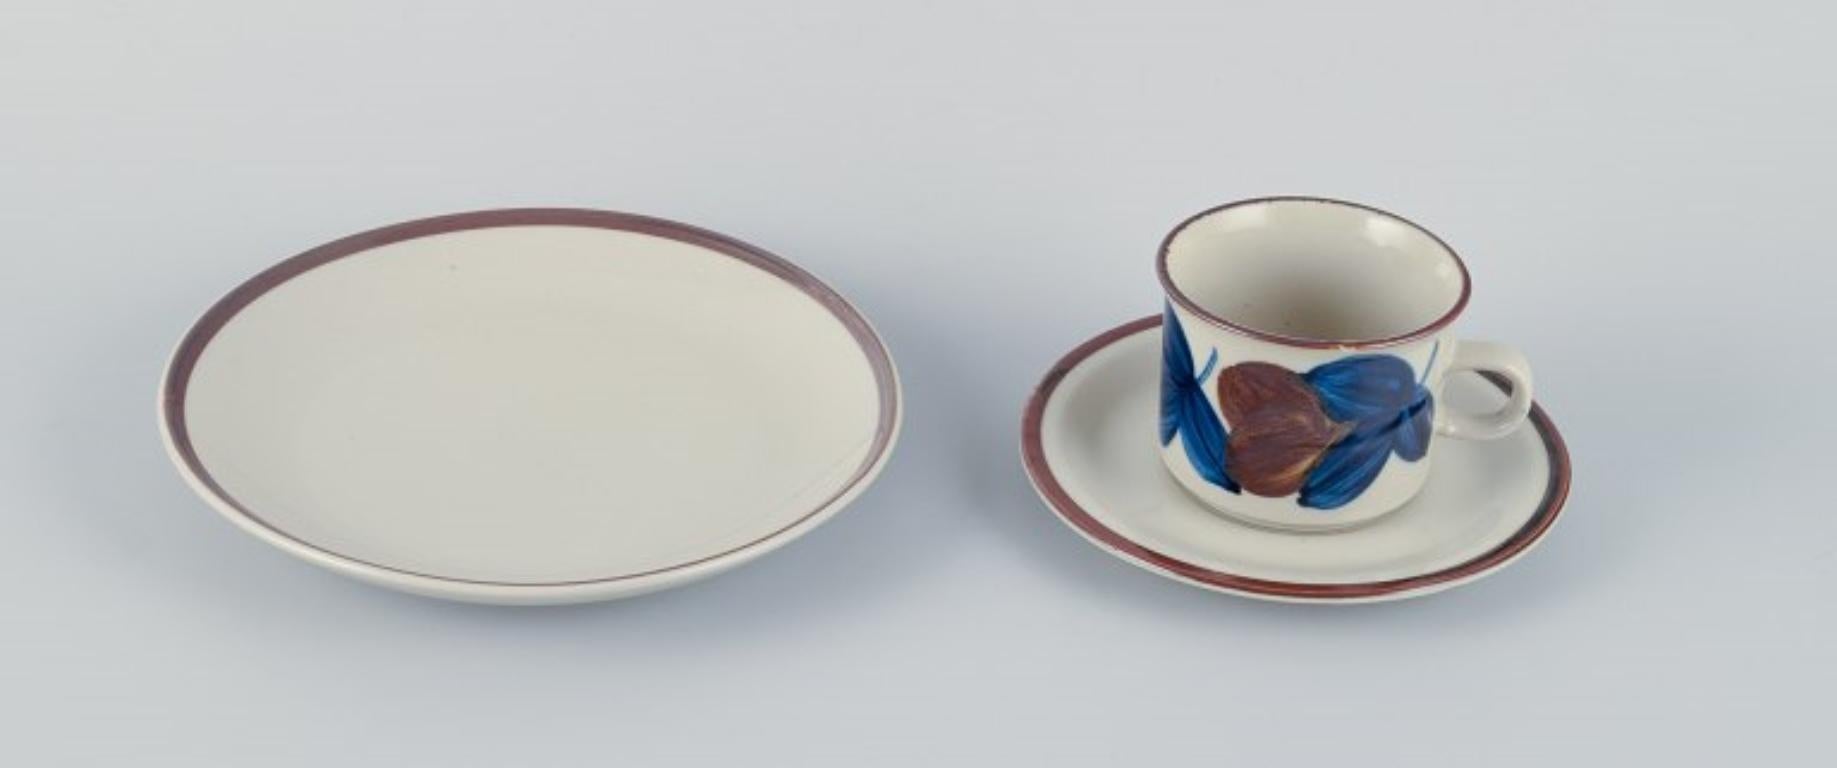 Arabia, Finland, six-person retro coffee set in stoneware.
Hand-painted with floral motifs.
1970s.
In perfect condition.
Not stamped.
Cup: H 6.0 cm x D 7.9 cm (excluding handle).
Plate: D 19.2 cm.